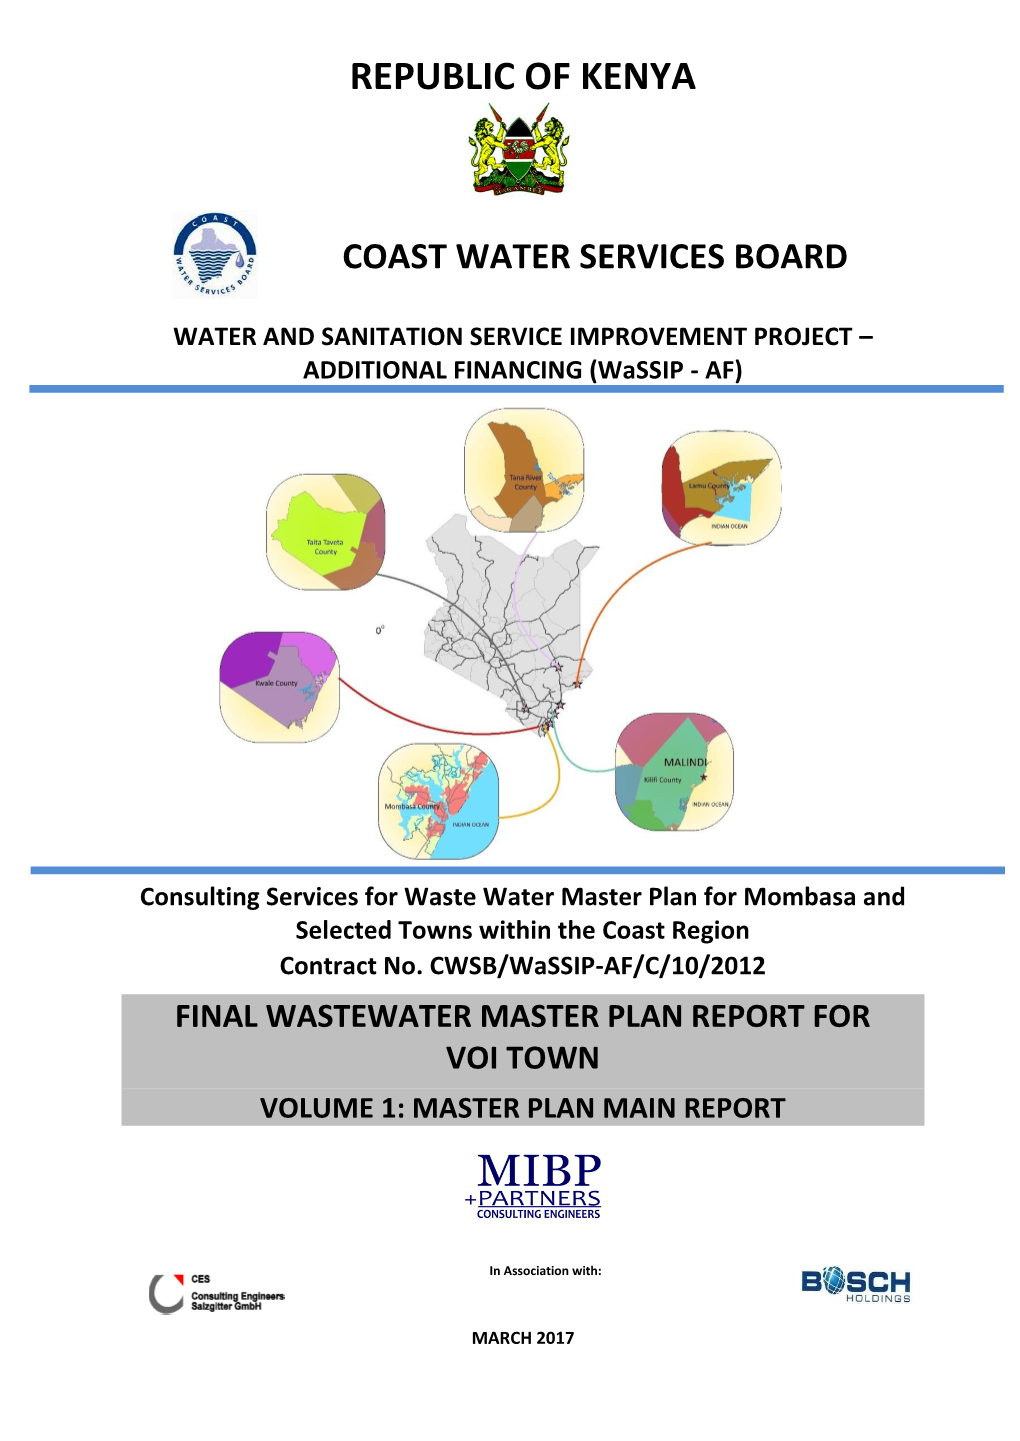 Wastewater Master Plan Report for Voi Town